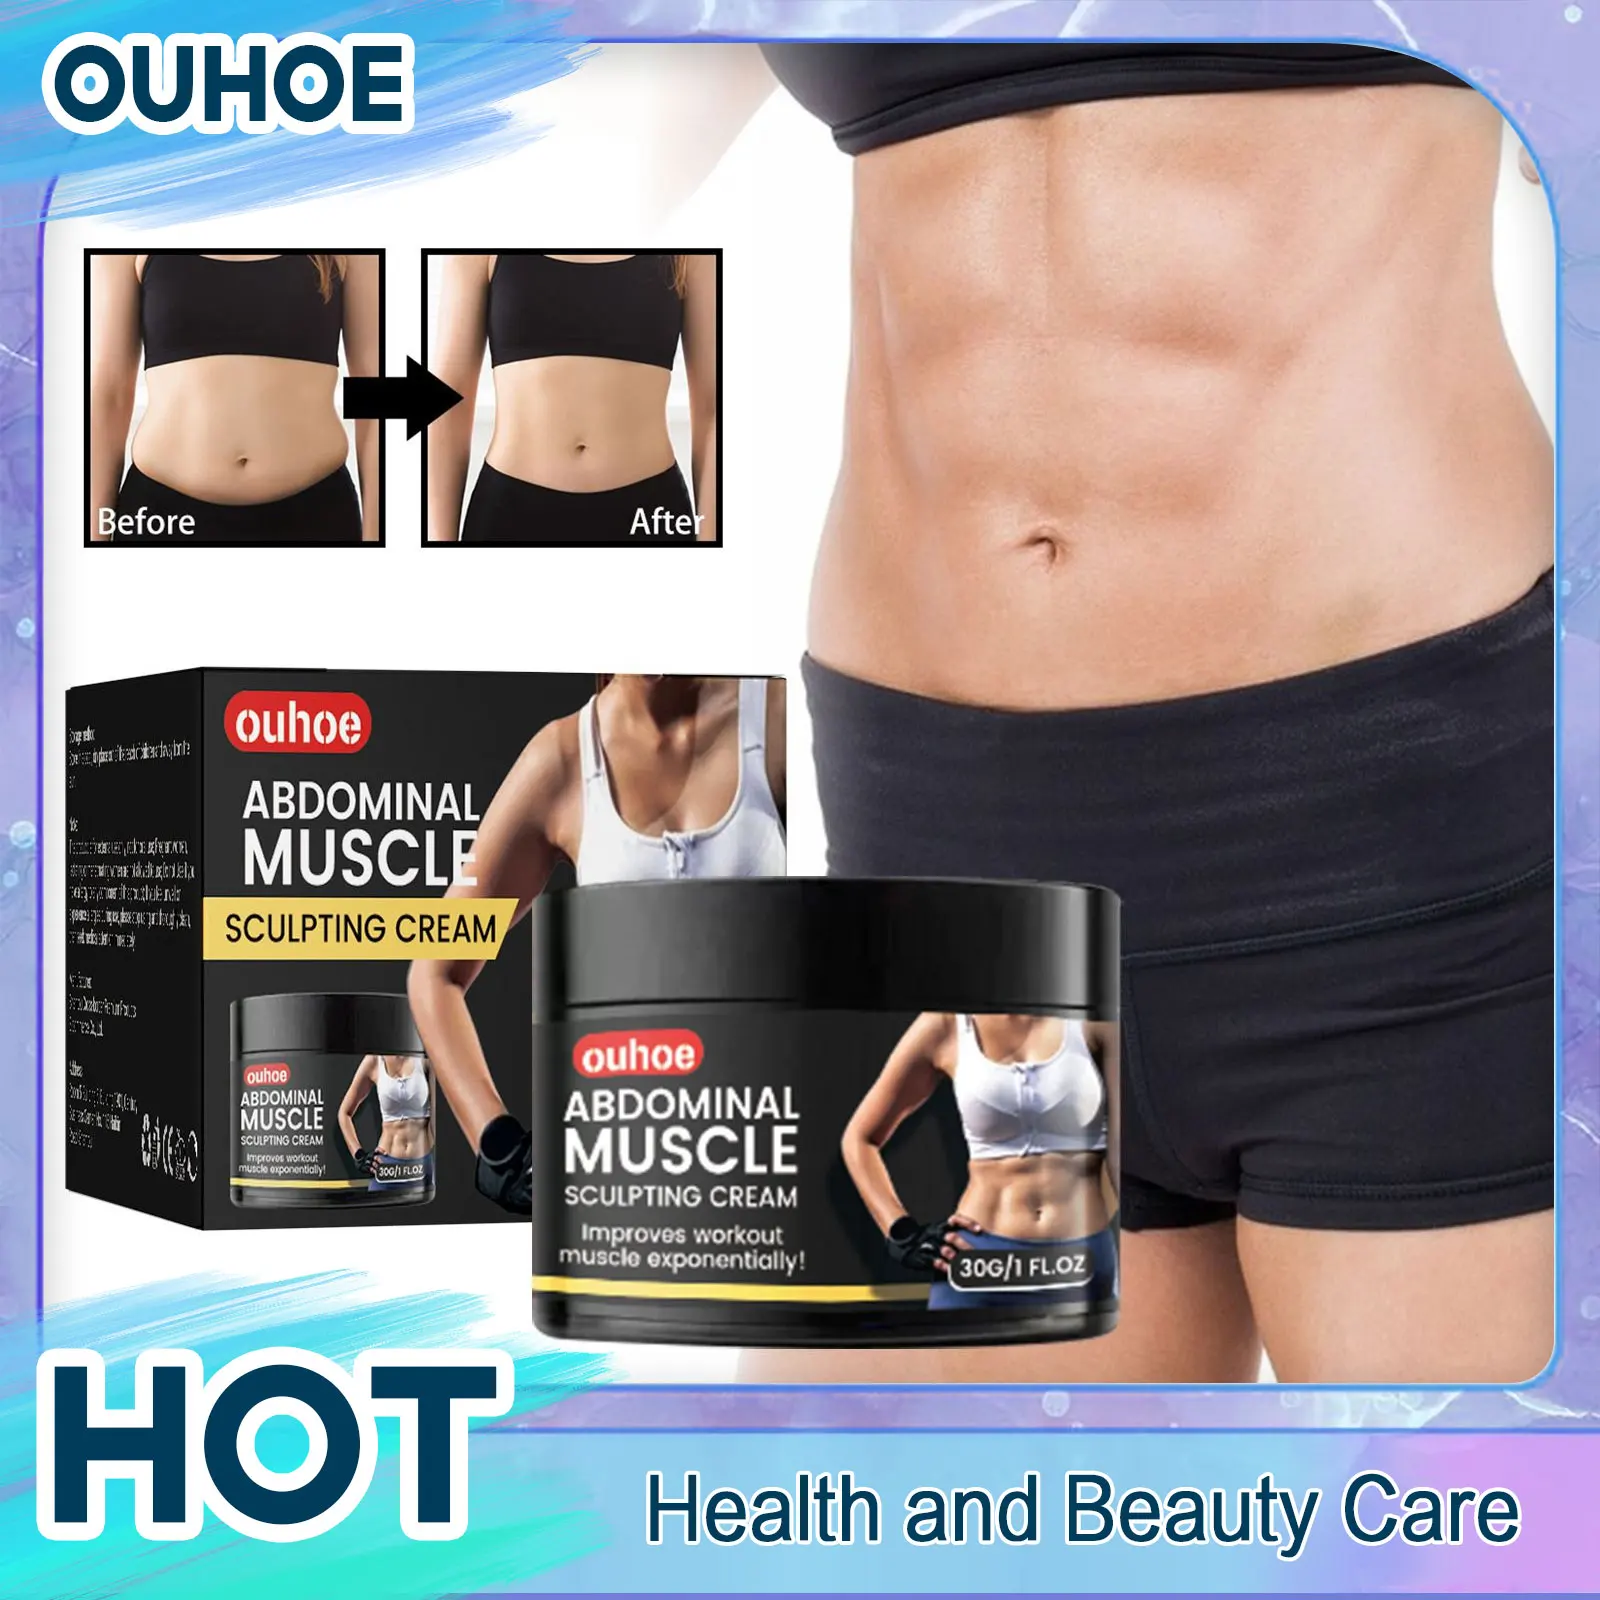 Belly Fat Burner Cream Weight Loss Firming Shaping Waist Lines Fitness Abdominal Muscle Flat Tummy Anti Cellulite Slimming Cream body slimming shaping oil fat burning quickly thin belly waist tummy burner anti cellulite massage losing weight essential oil